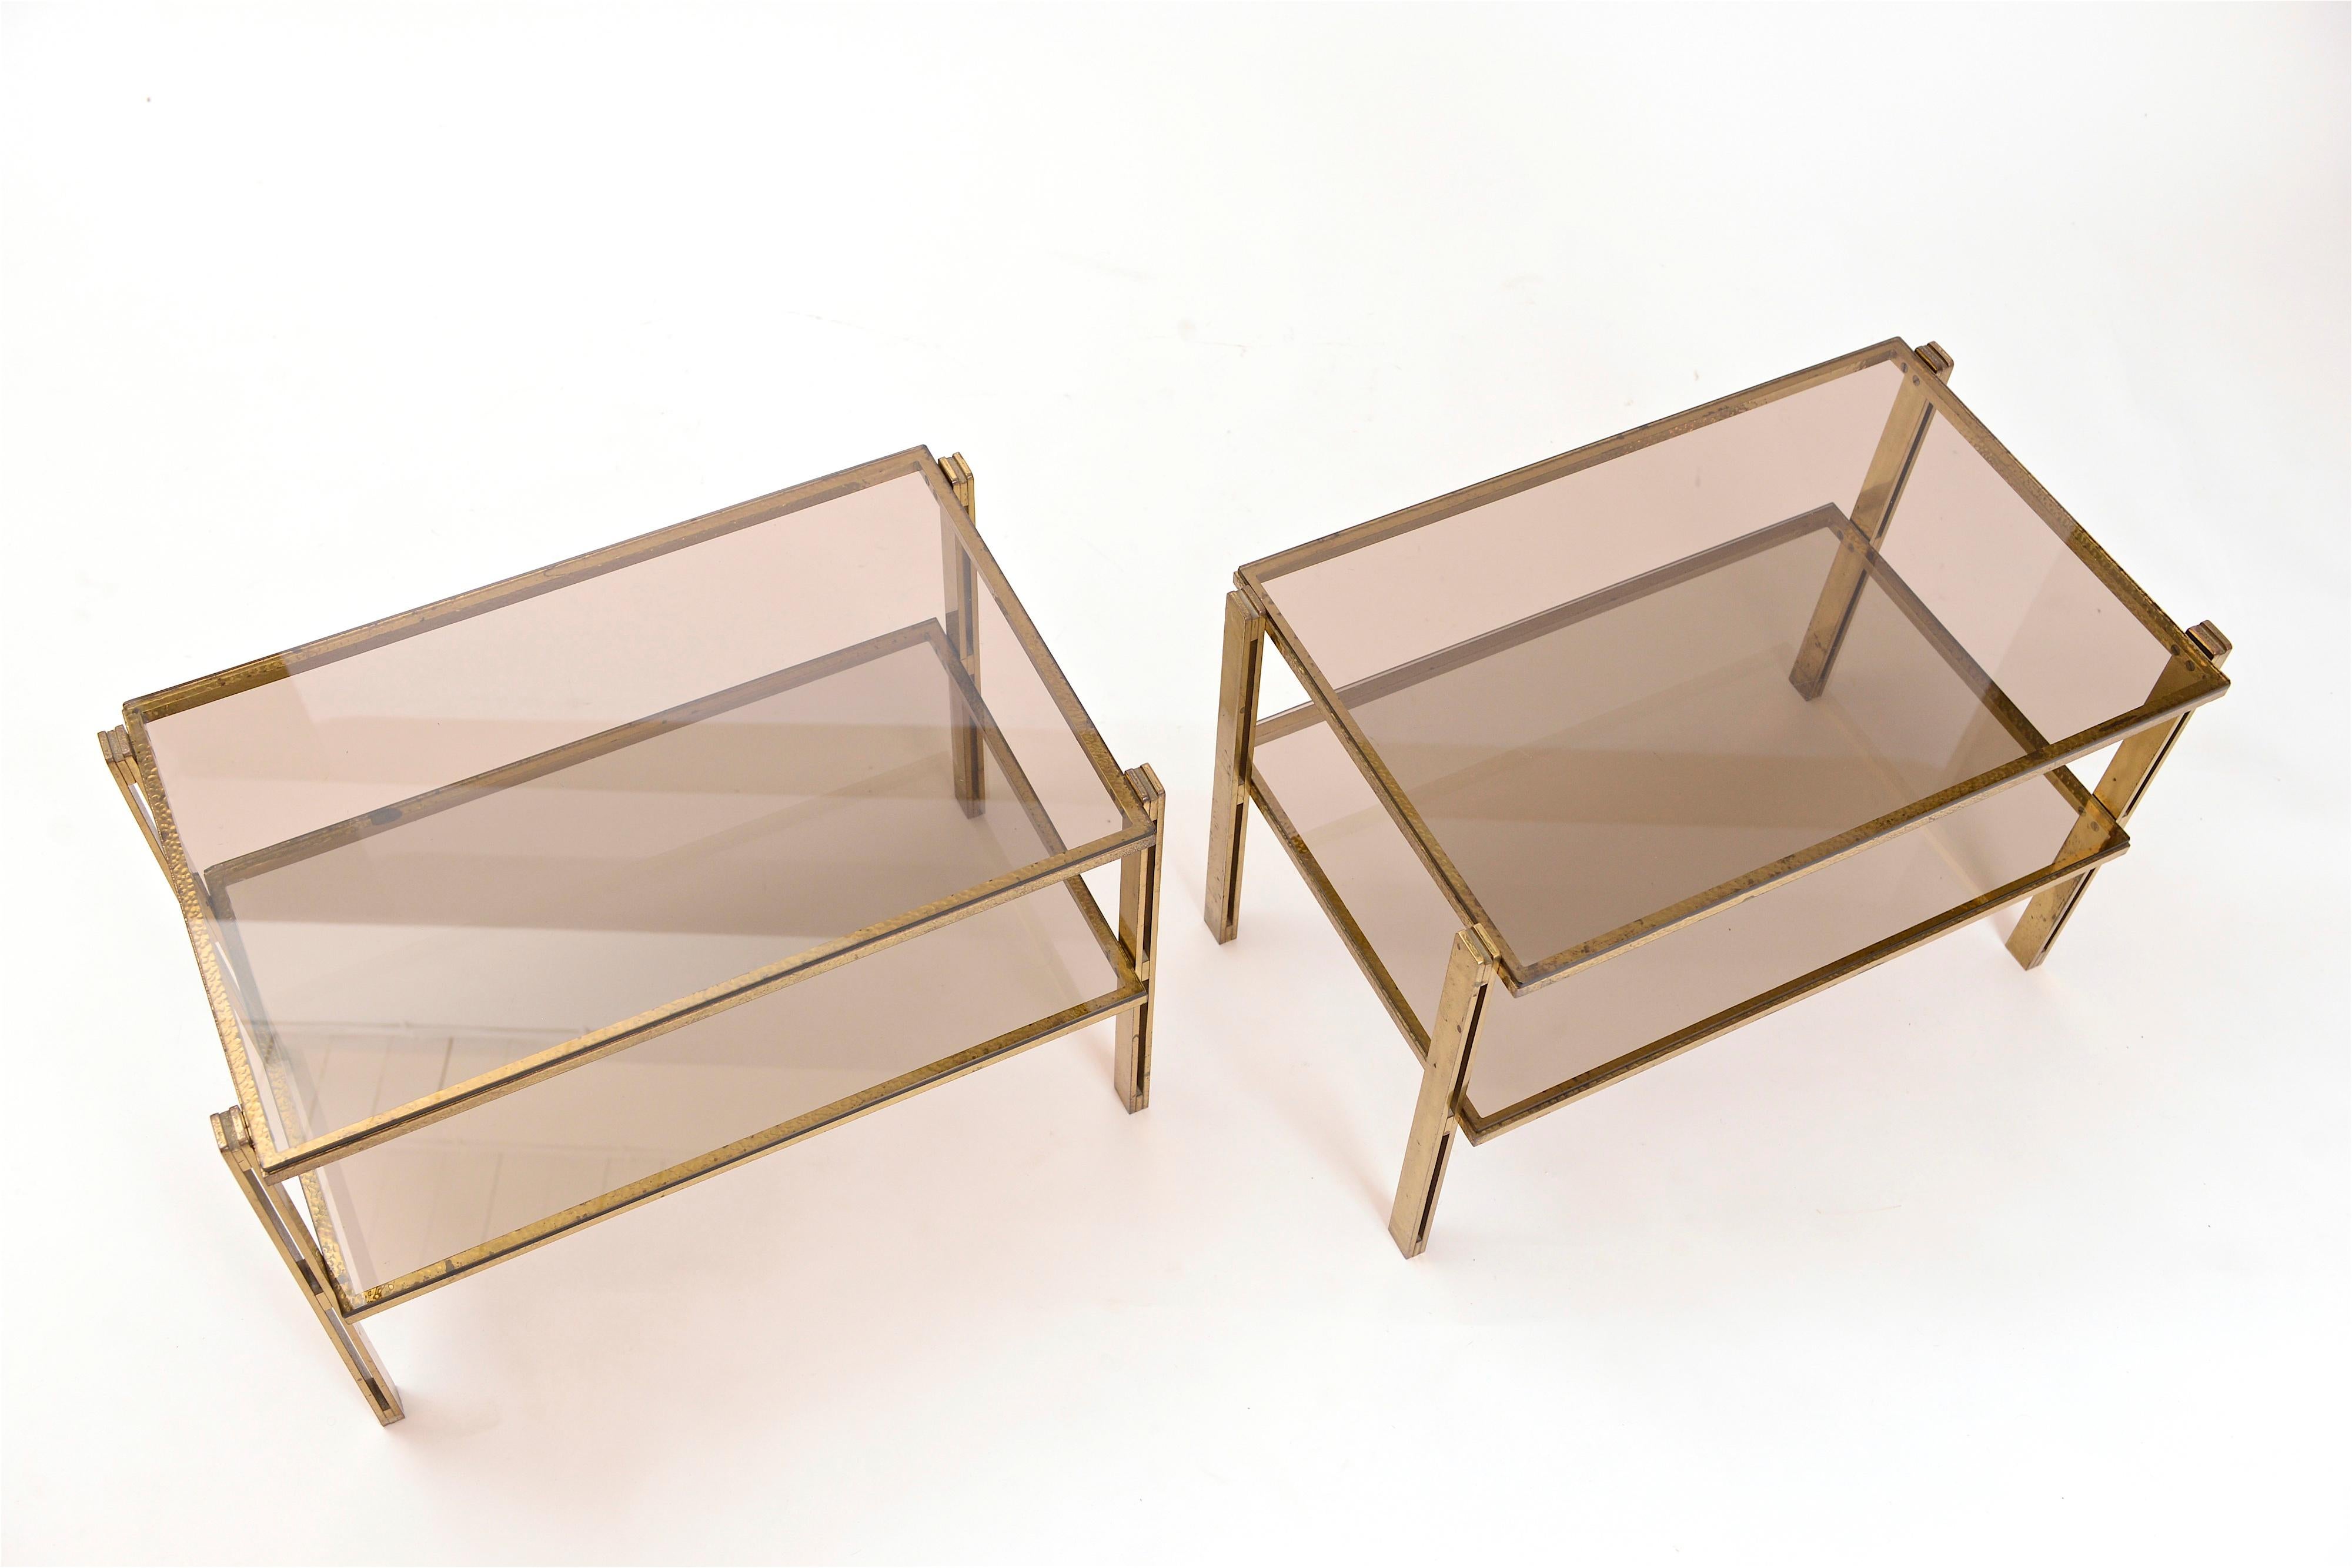 Pair of Hammered Brass Side Tables Attributed to Osvaldo Borsani, circa 1958 For Sale 1